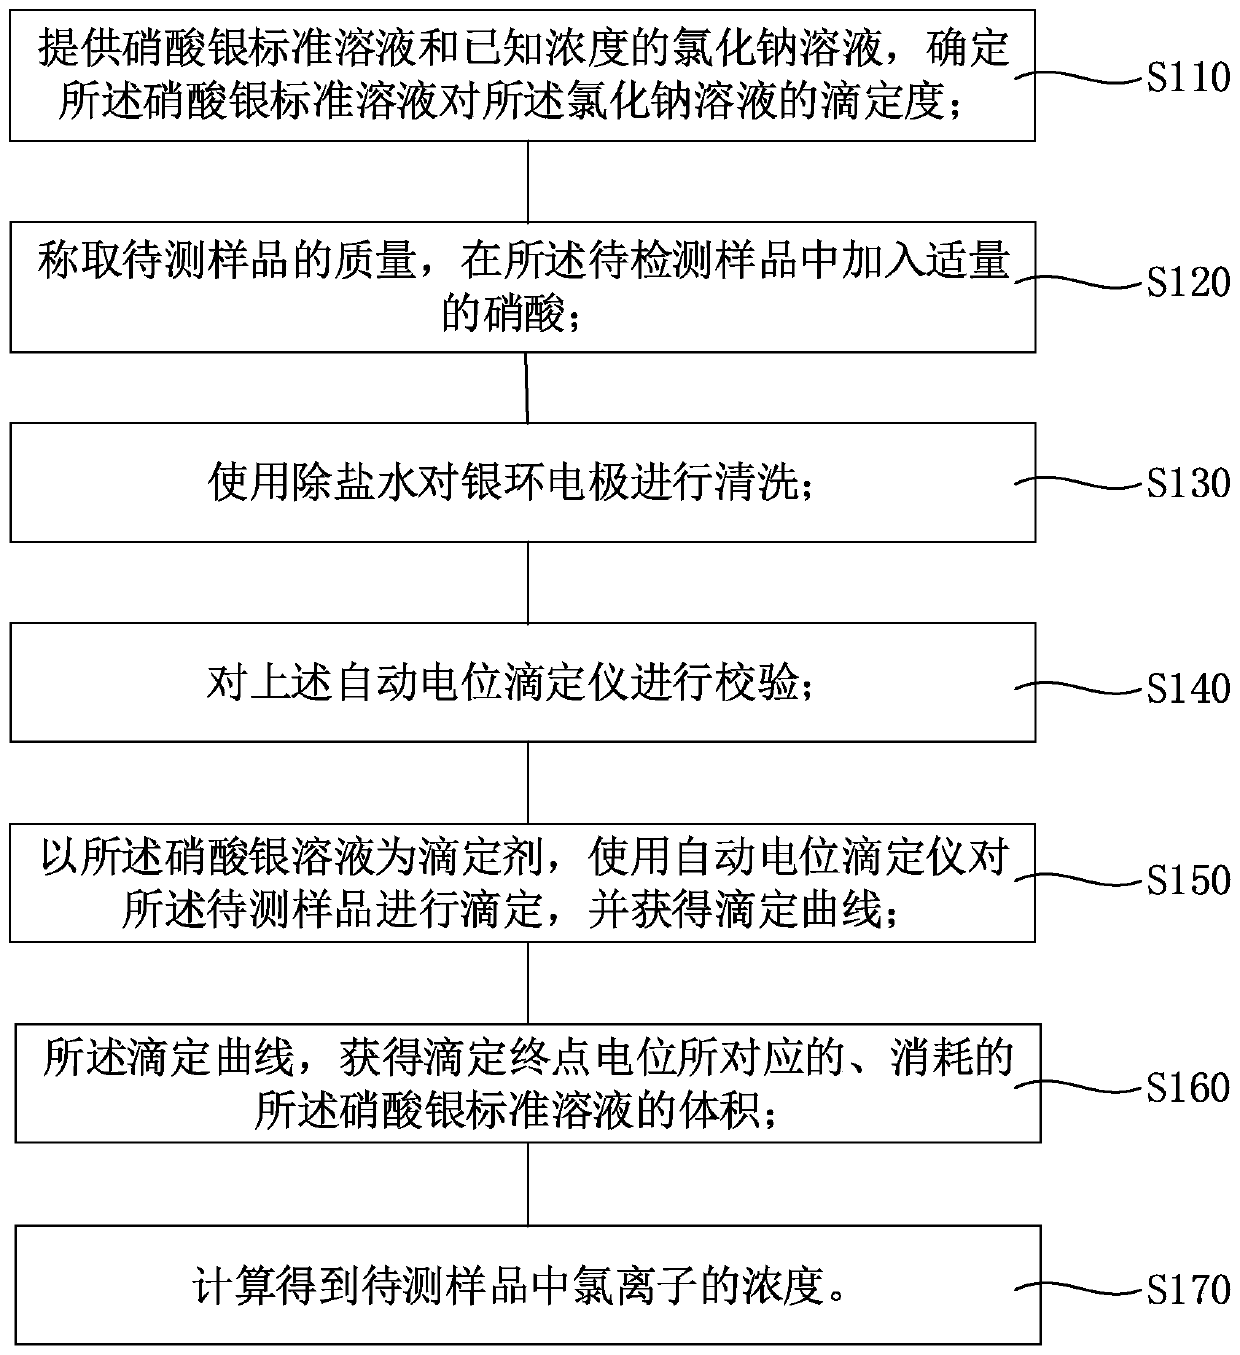 Chloride ion concentration determining method in nuclear power plant waste liquid treatment system and application thereof